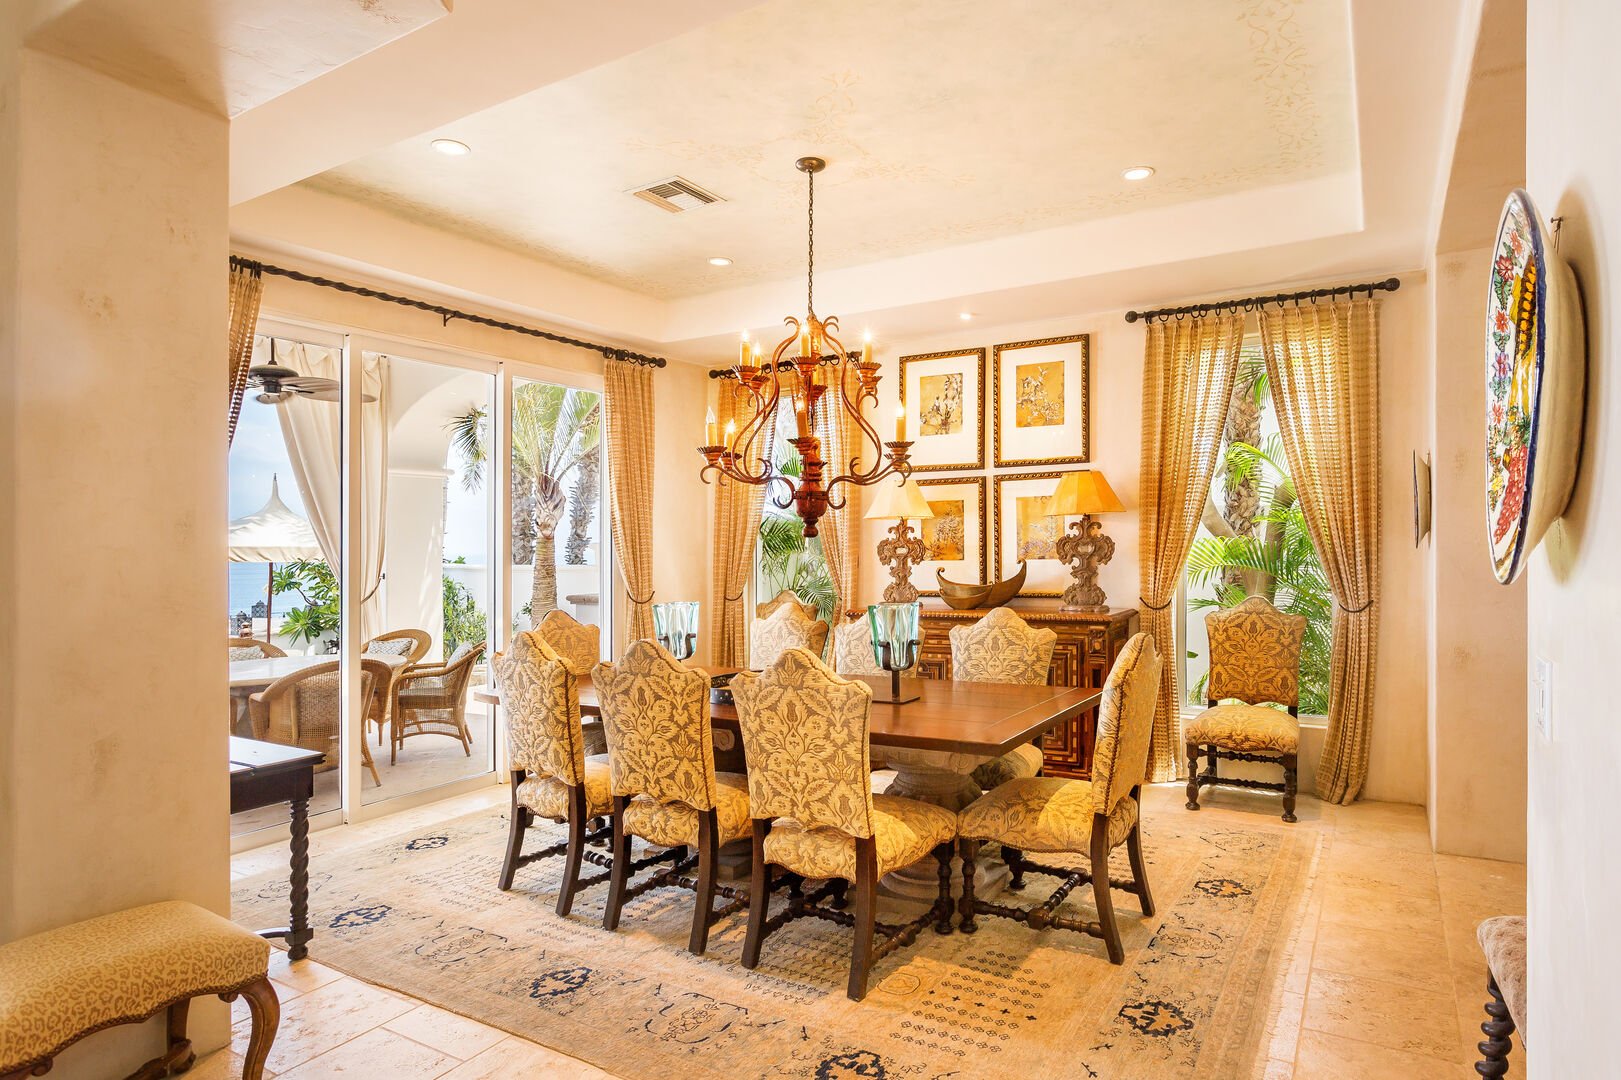 Dining table, chairs, and sliding glass doors to the outdoor patio with an ocean view